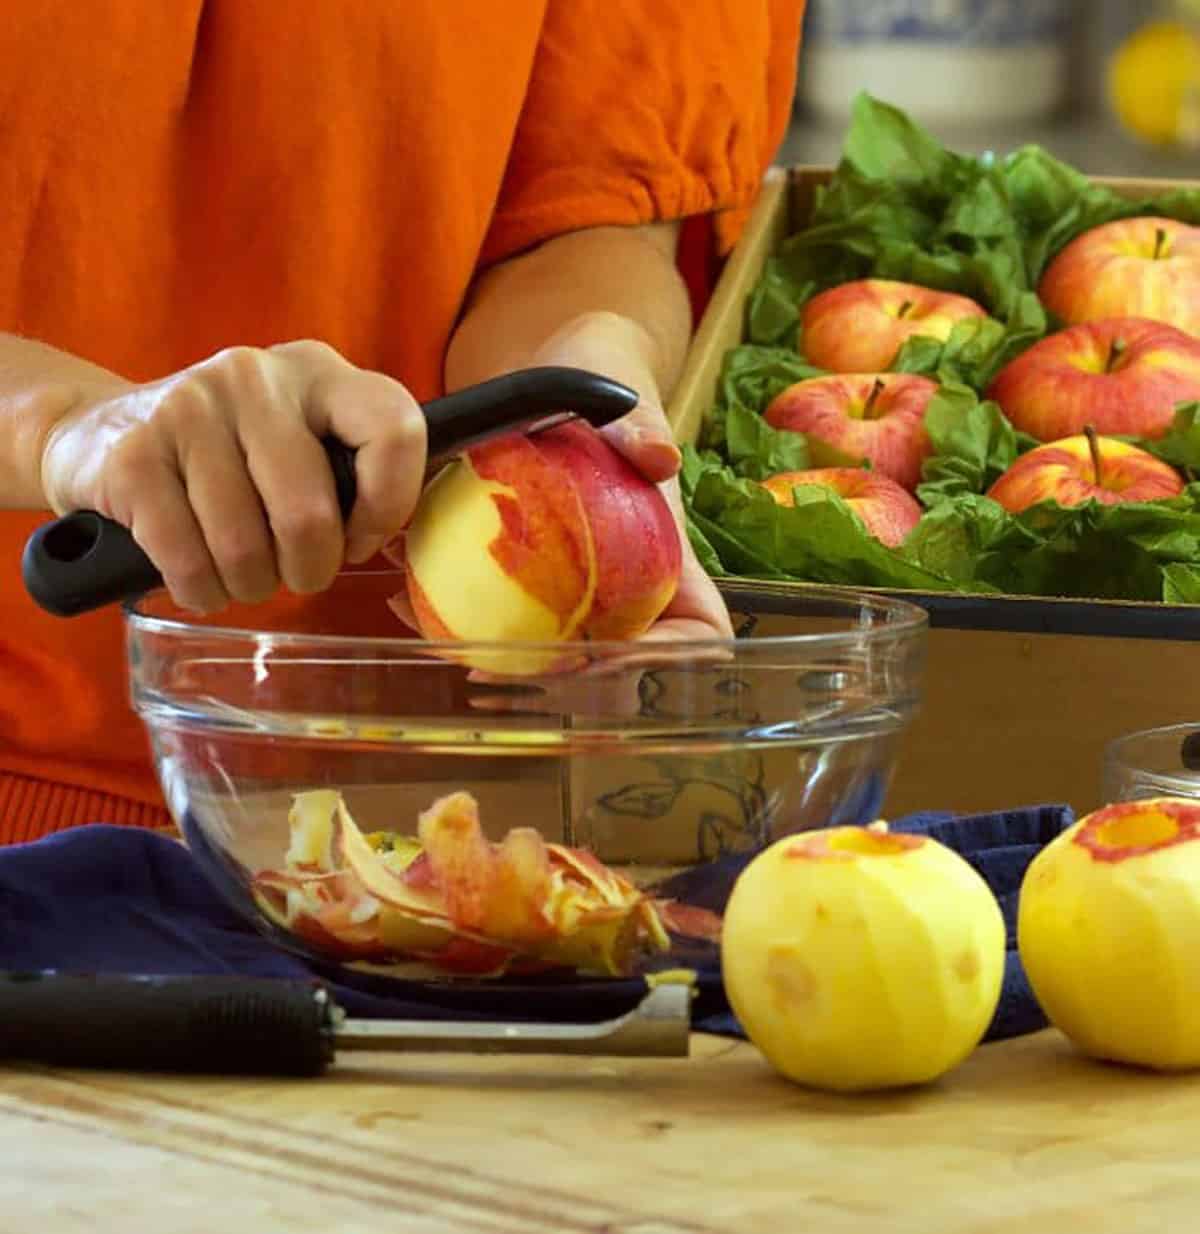 hands with a vegetable peeler removing the skin from an apple into a bowl.